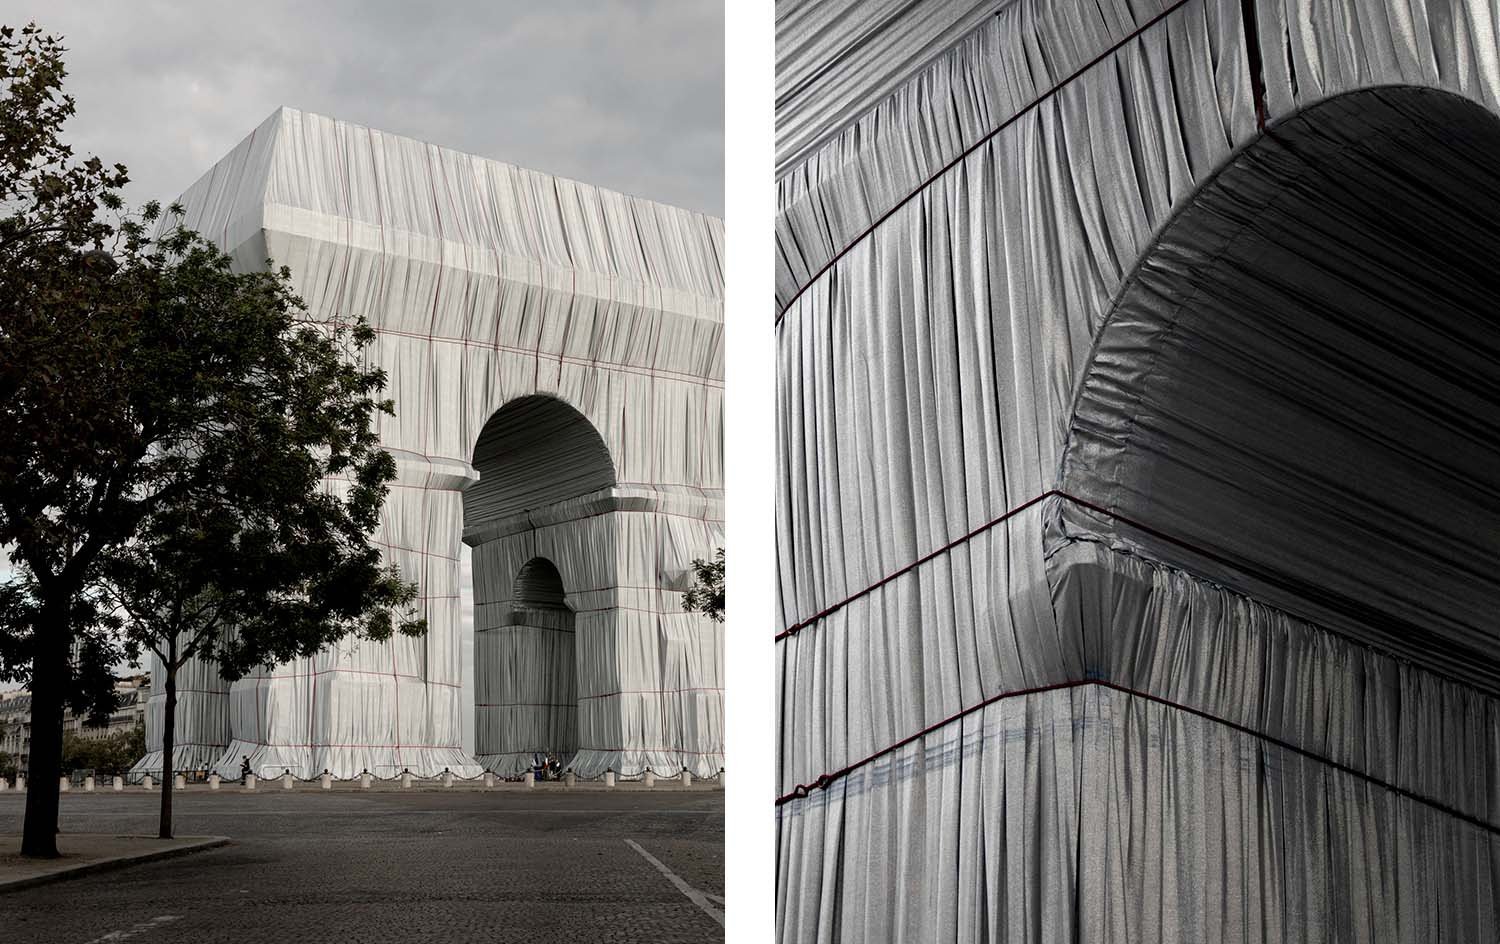  Christo and Jeanne-Claude,  L'Arc de Triomphe Wrapped , installation, 2021 